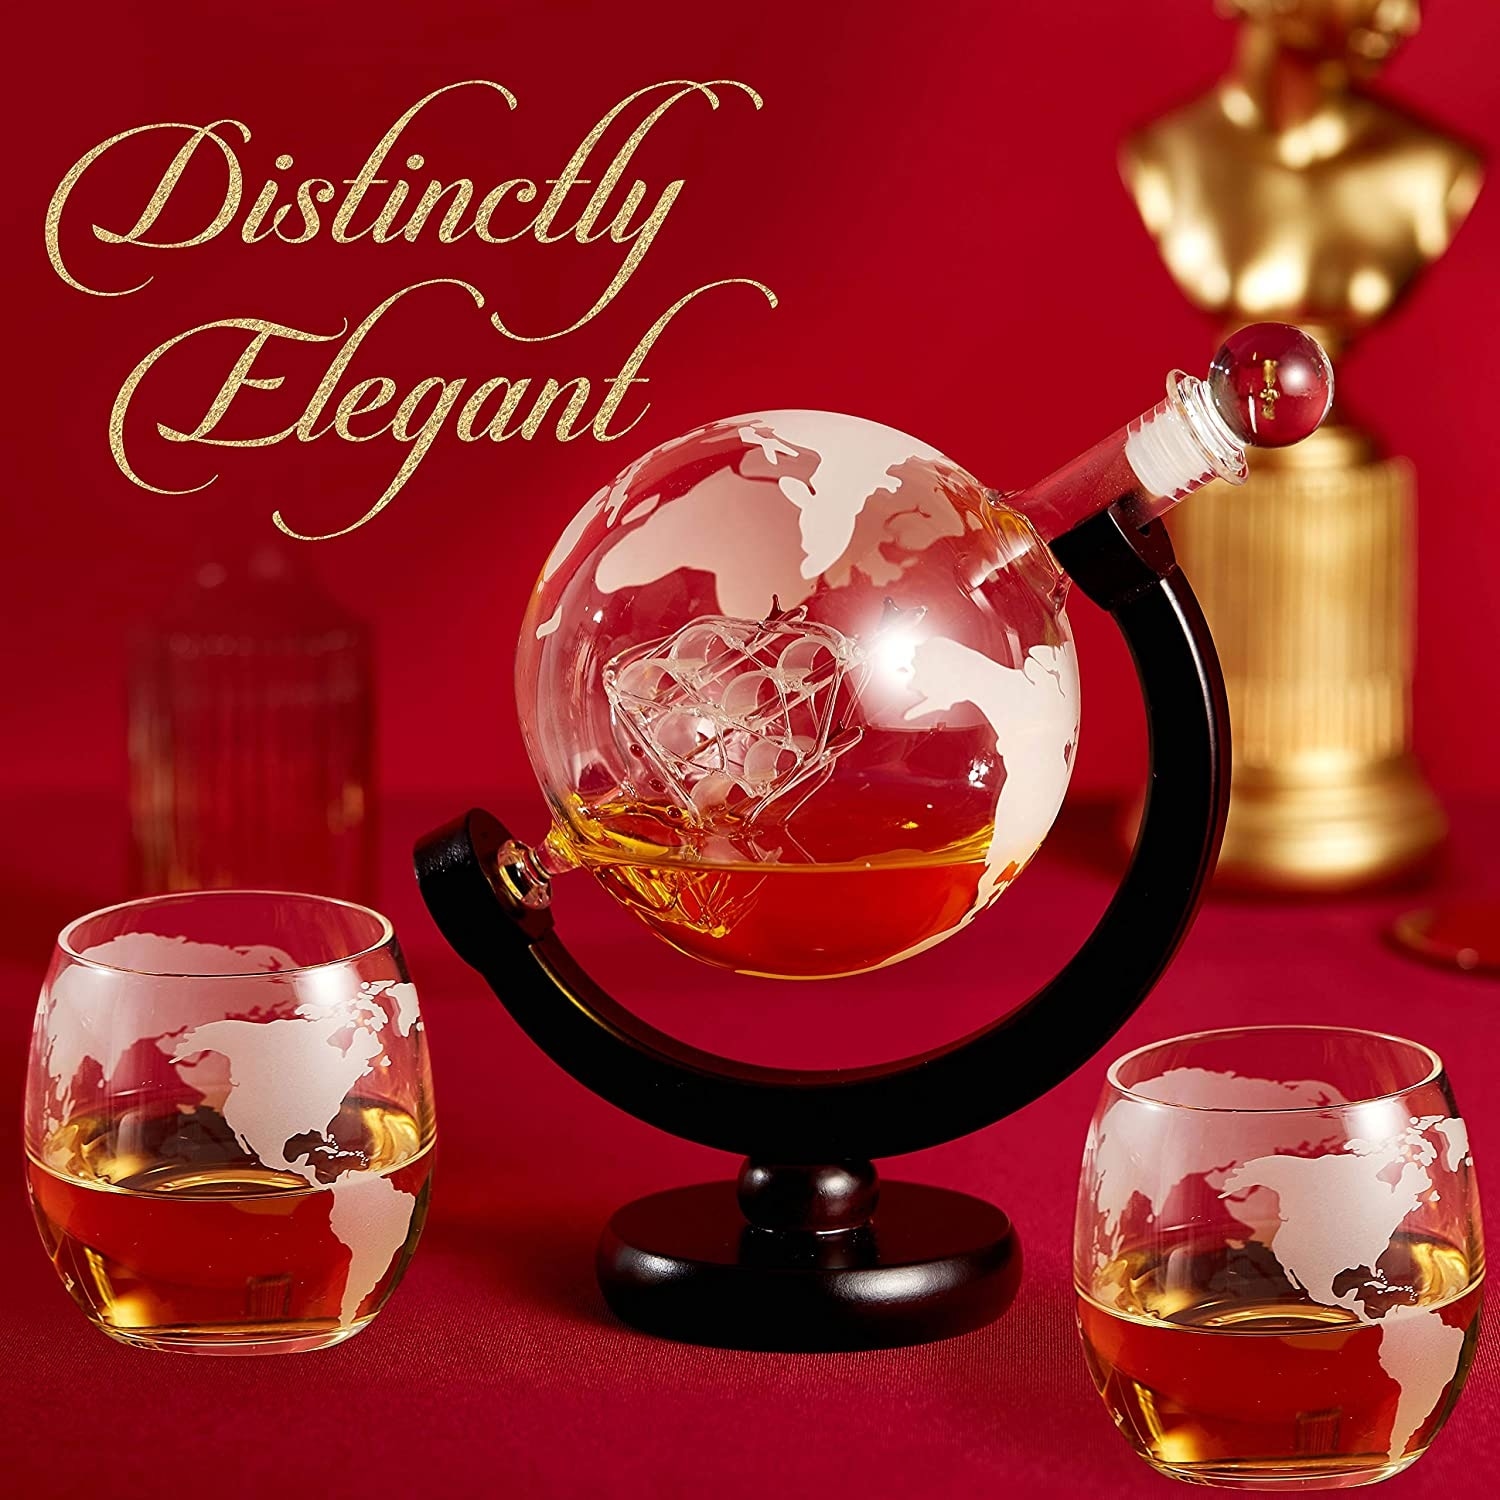 https://ak1.ostkcdn.com/images/products/is/images/direct/88075f09b33c1fdd451d3e3a4bd205c32225d349/Cheer-Collection-Globe-Etched-Whiskey-Decanter-With-Interior-Hand-Crafted-Glass-Ship---Gift-Set-with-Globe-Glasses.jpg